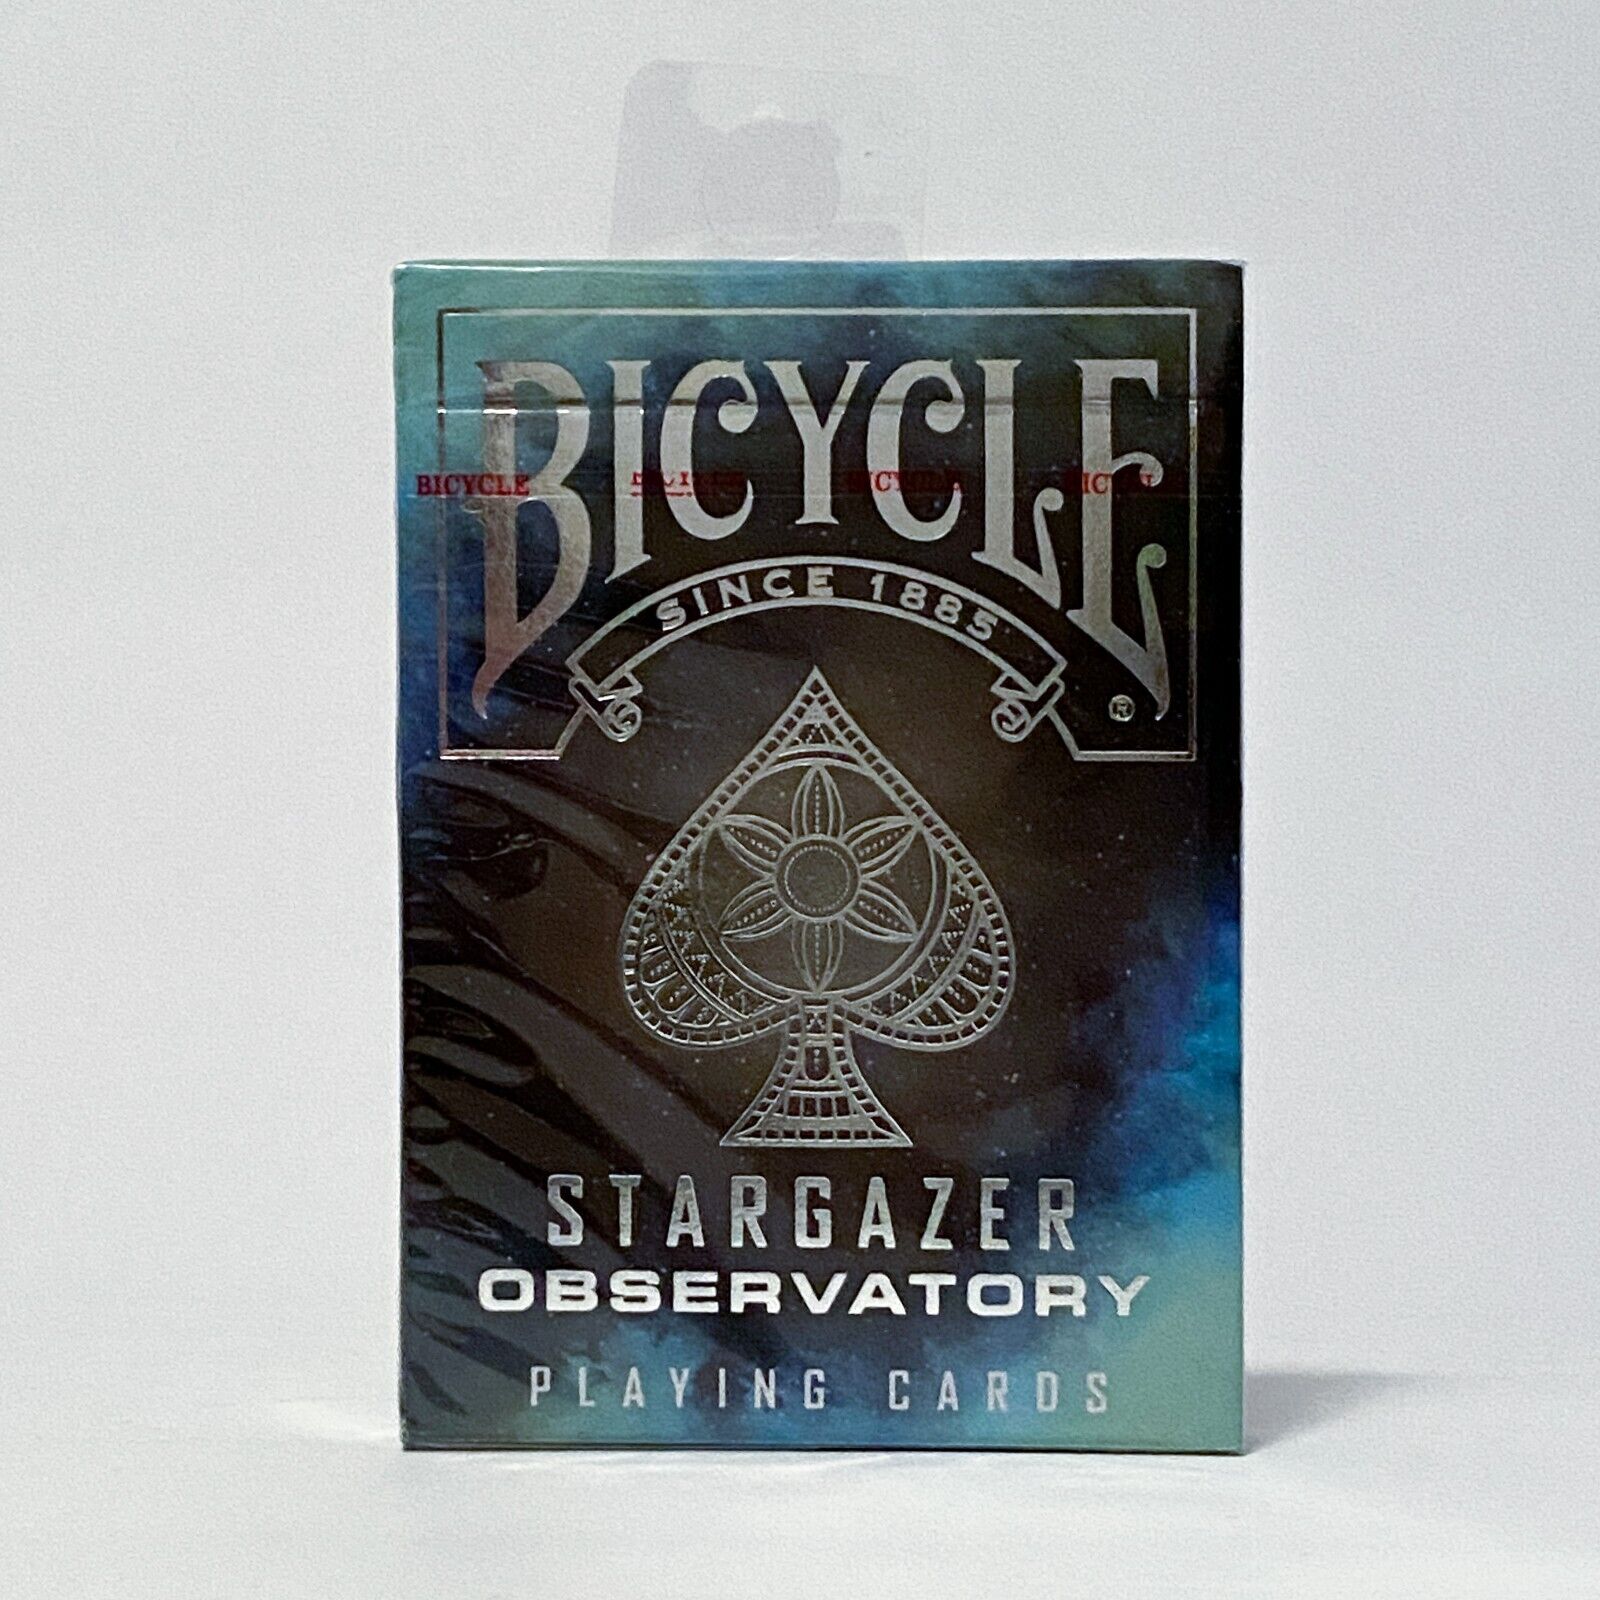 Bicycle Stargazer Observatory Air-Cushion Playing Cards Cardistry/Magic Deck